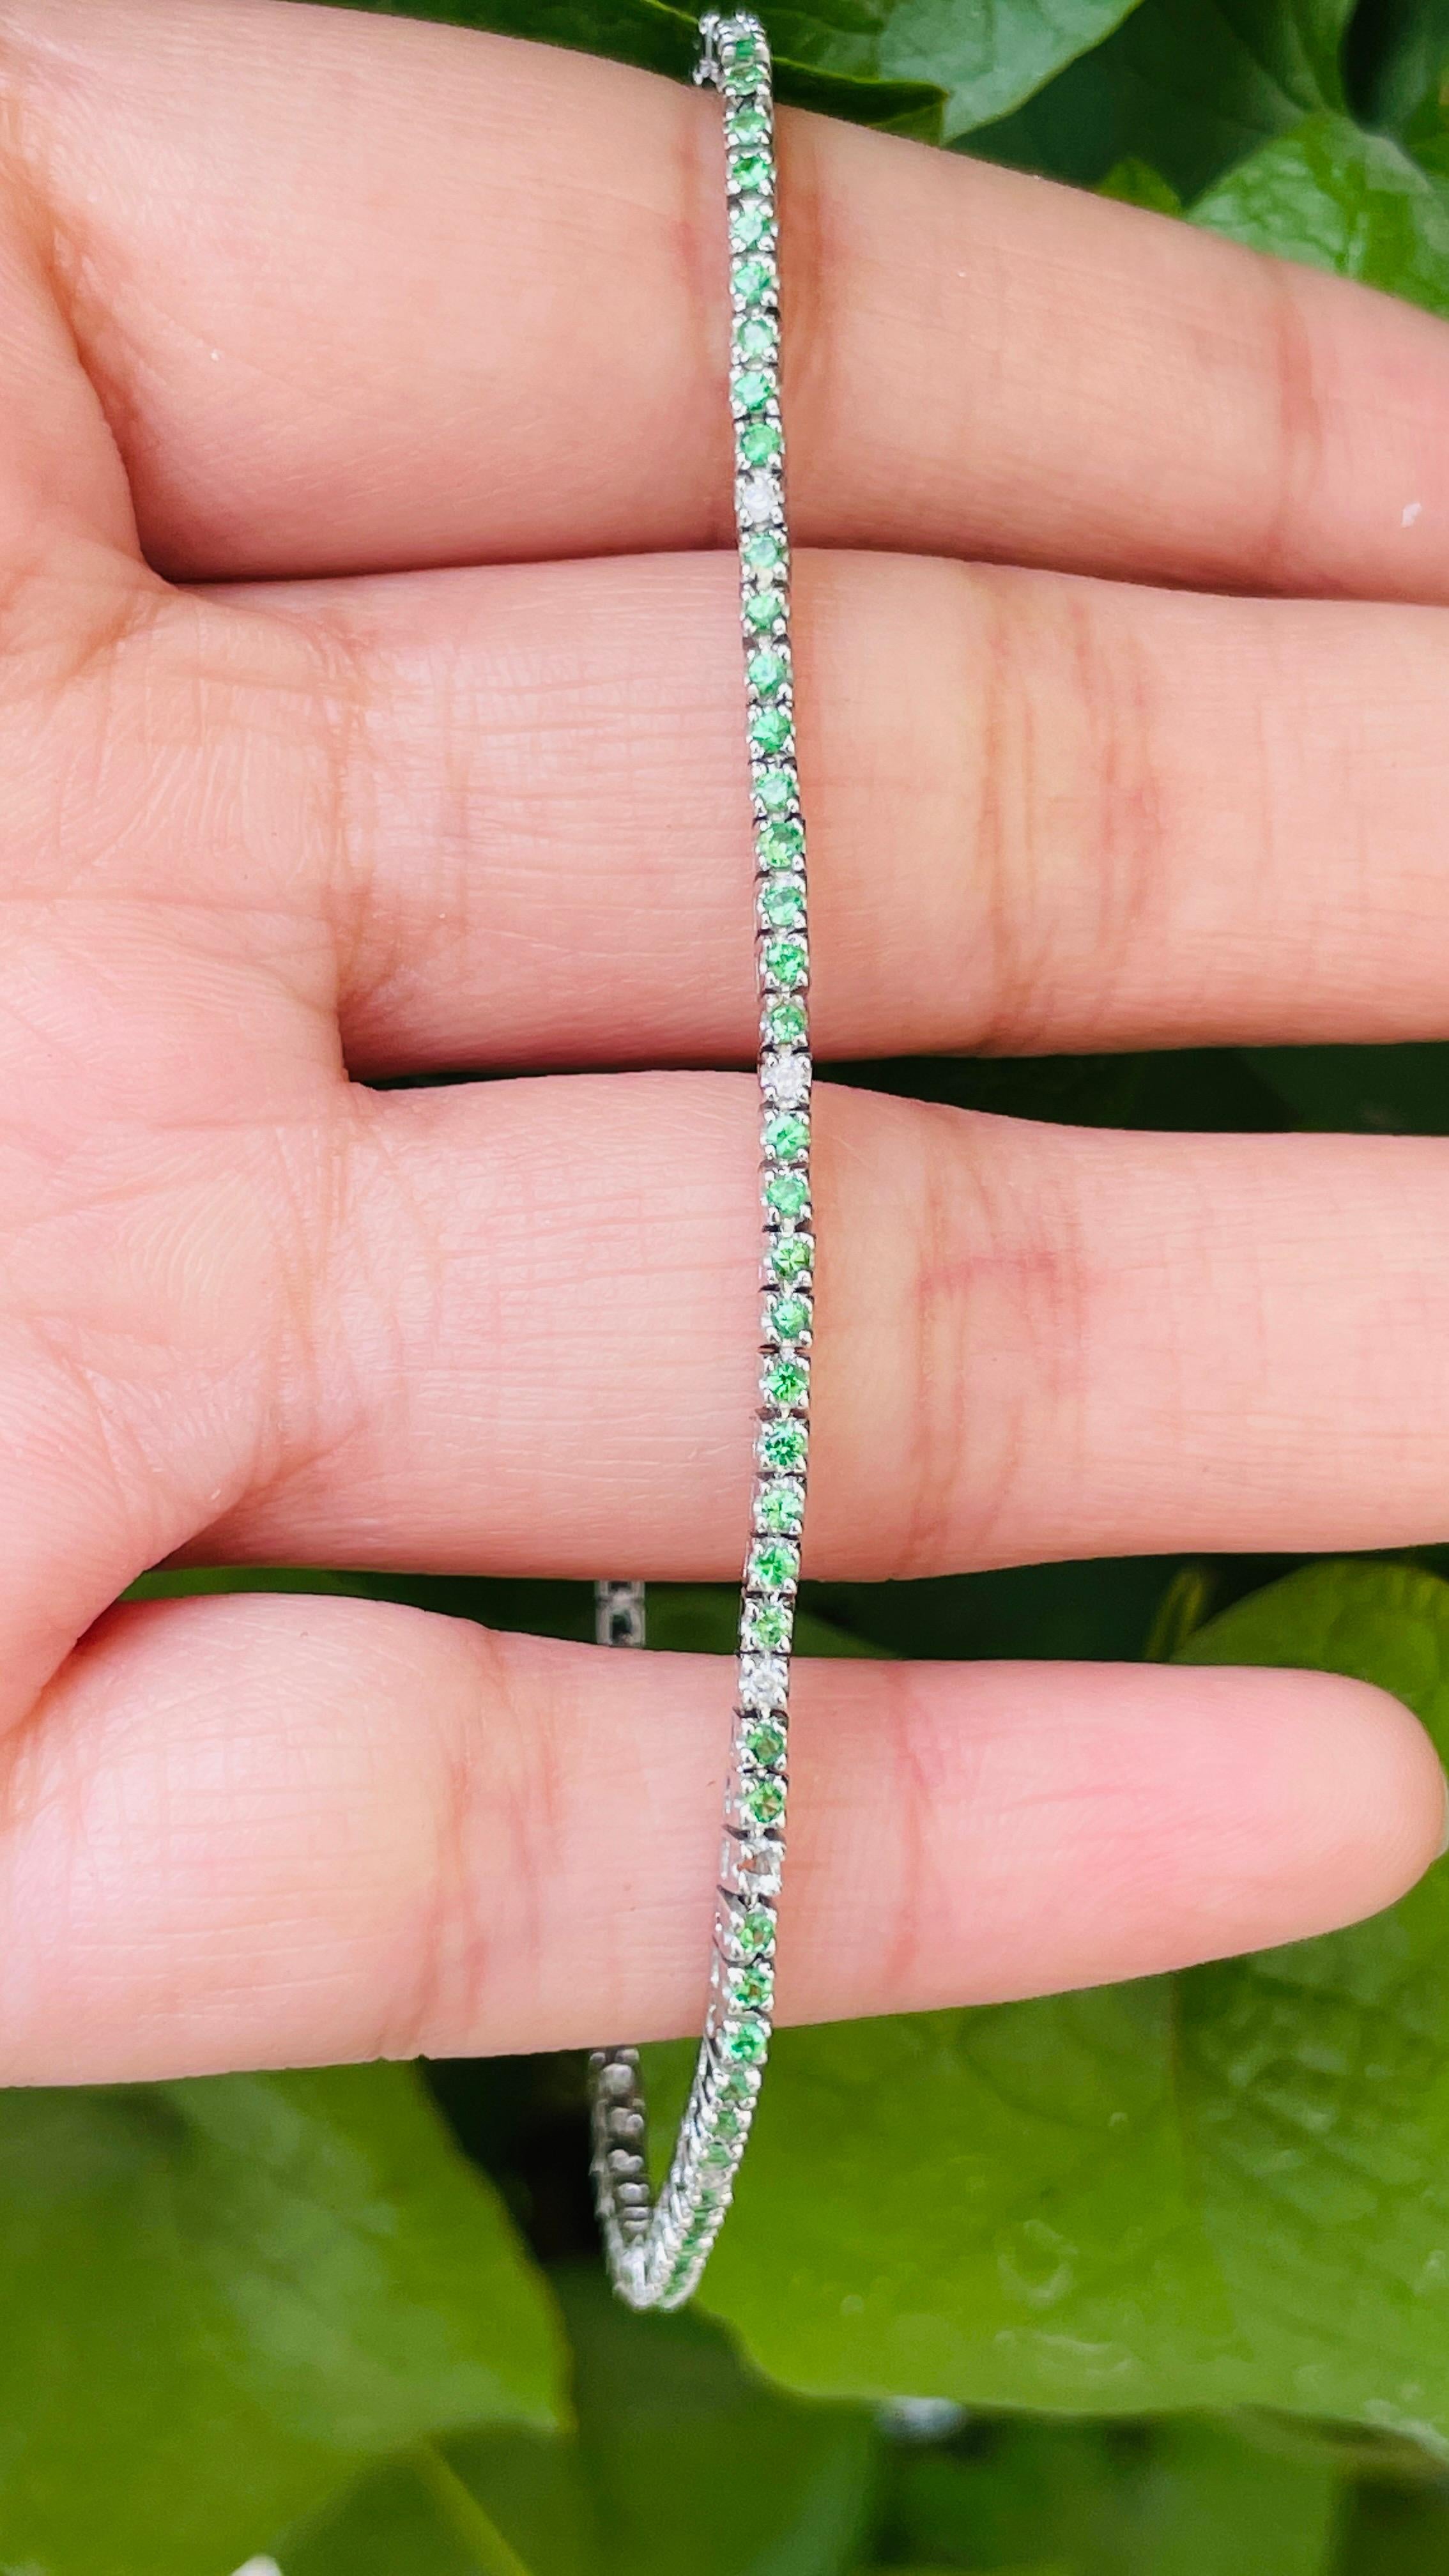 This Round-Cut Tsavorite Diamond Tennis Bracelet in 18K gold showcases 90 endlessly sparkling natural tsavorite, weighing 0.95 carats and 10 diamond pieces weighing 0.1 carat. It measures 8 inches long in length. 
Tsavorite increase the wearer's